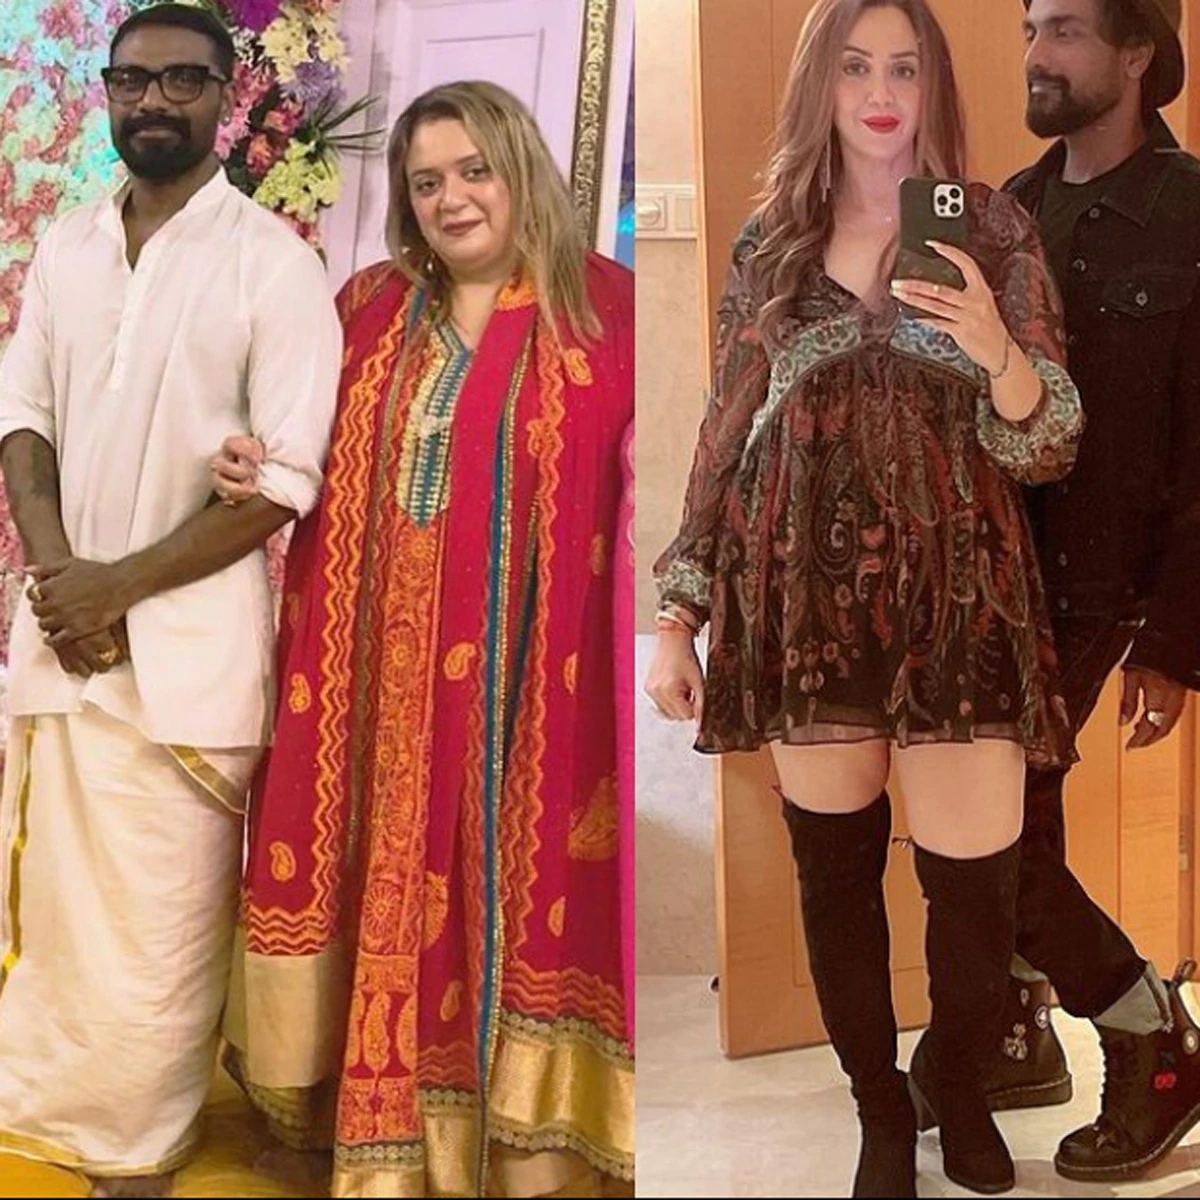 Remo Dsouza Wife Lizelle Dsouza Transformation Image Share on Social Media viral news in Hindi | Remo Dsouza Shares Wife Lizelles Transformation Photo Looks Stunning